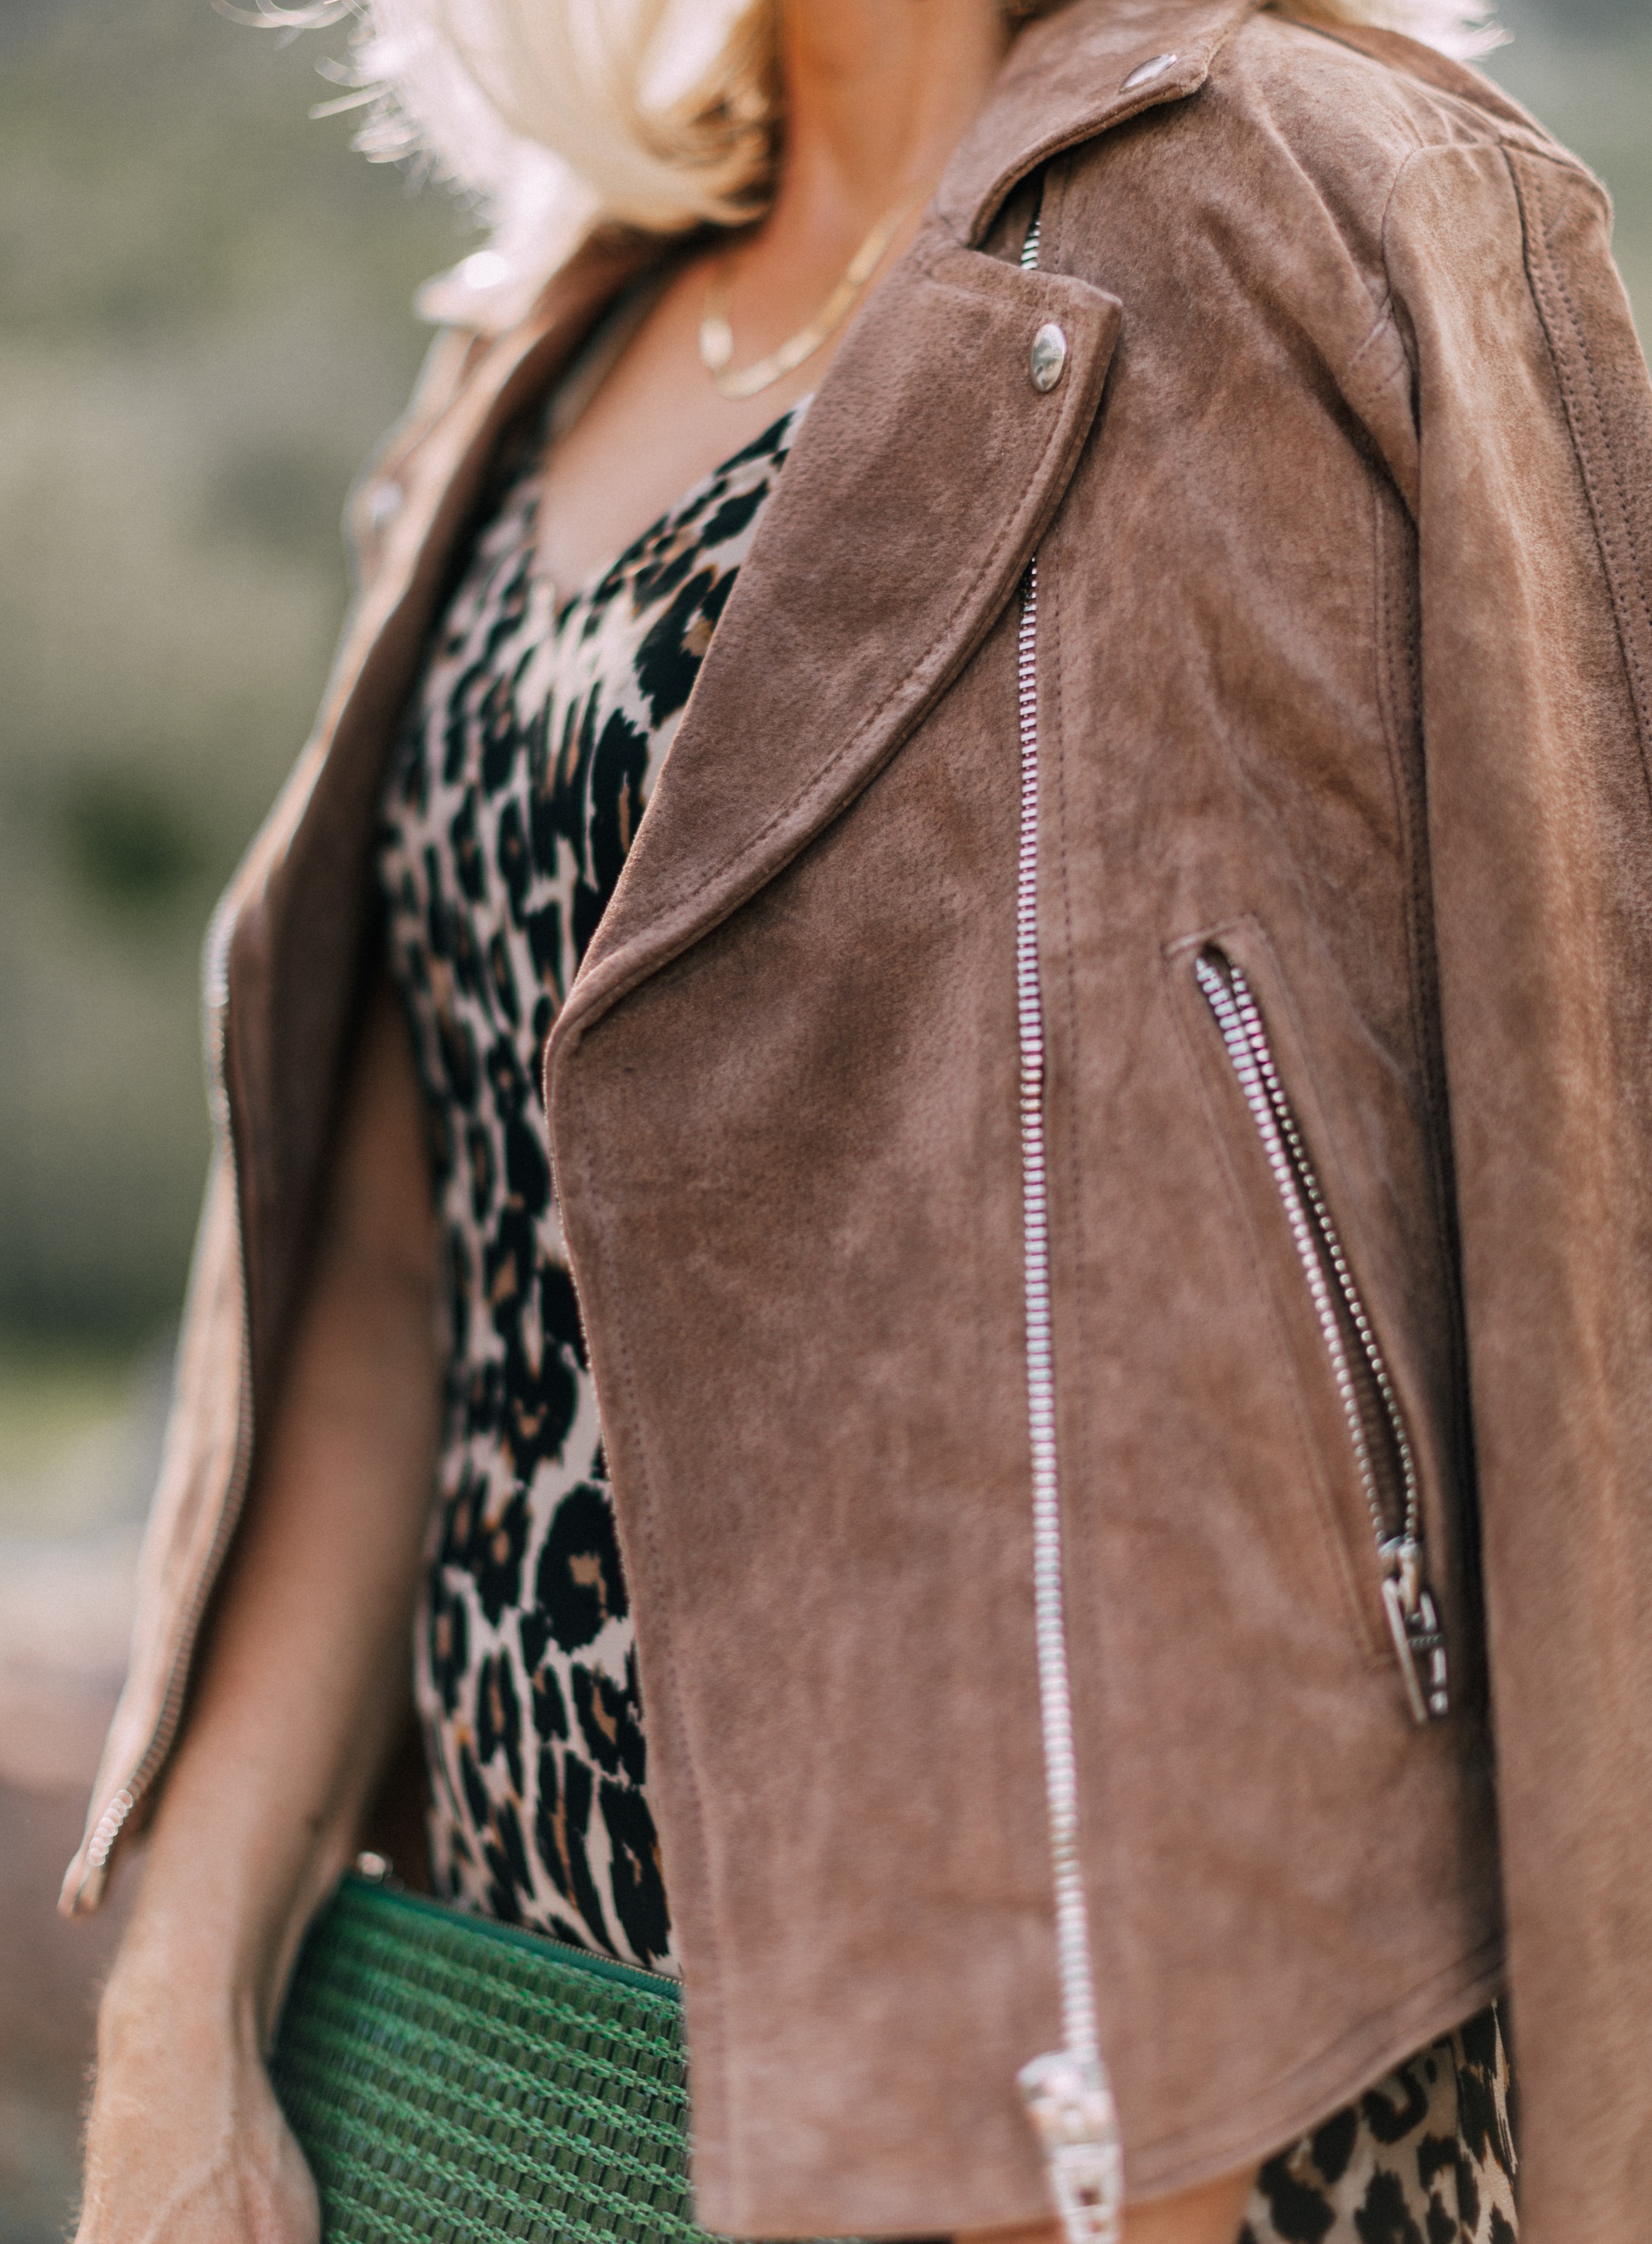 Styling animal print clothes with neutral Accessories, Fashion blogger Erin Busbee of BusbeeStyle,com wearing leopard print slip dress, blanknyc tan suede moto jacket, tan suede peep-toe mules and a green woven clutch by Vince Camuto in Telluride, CO